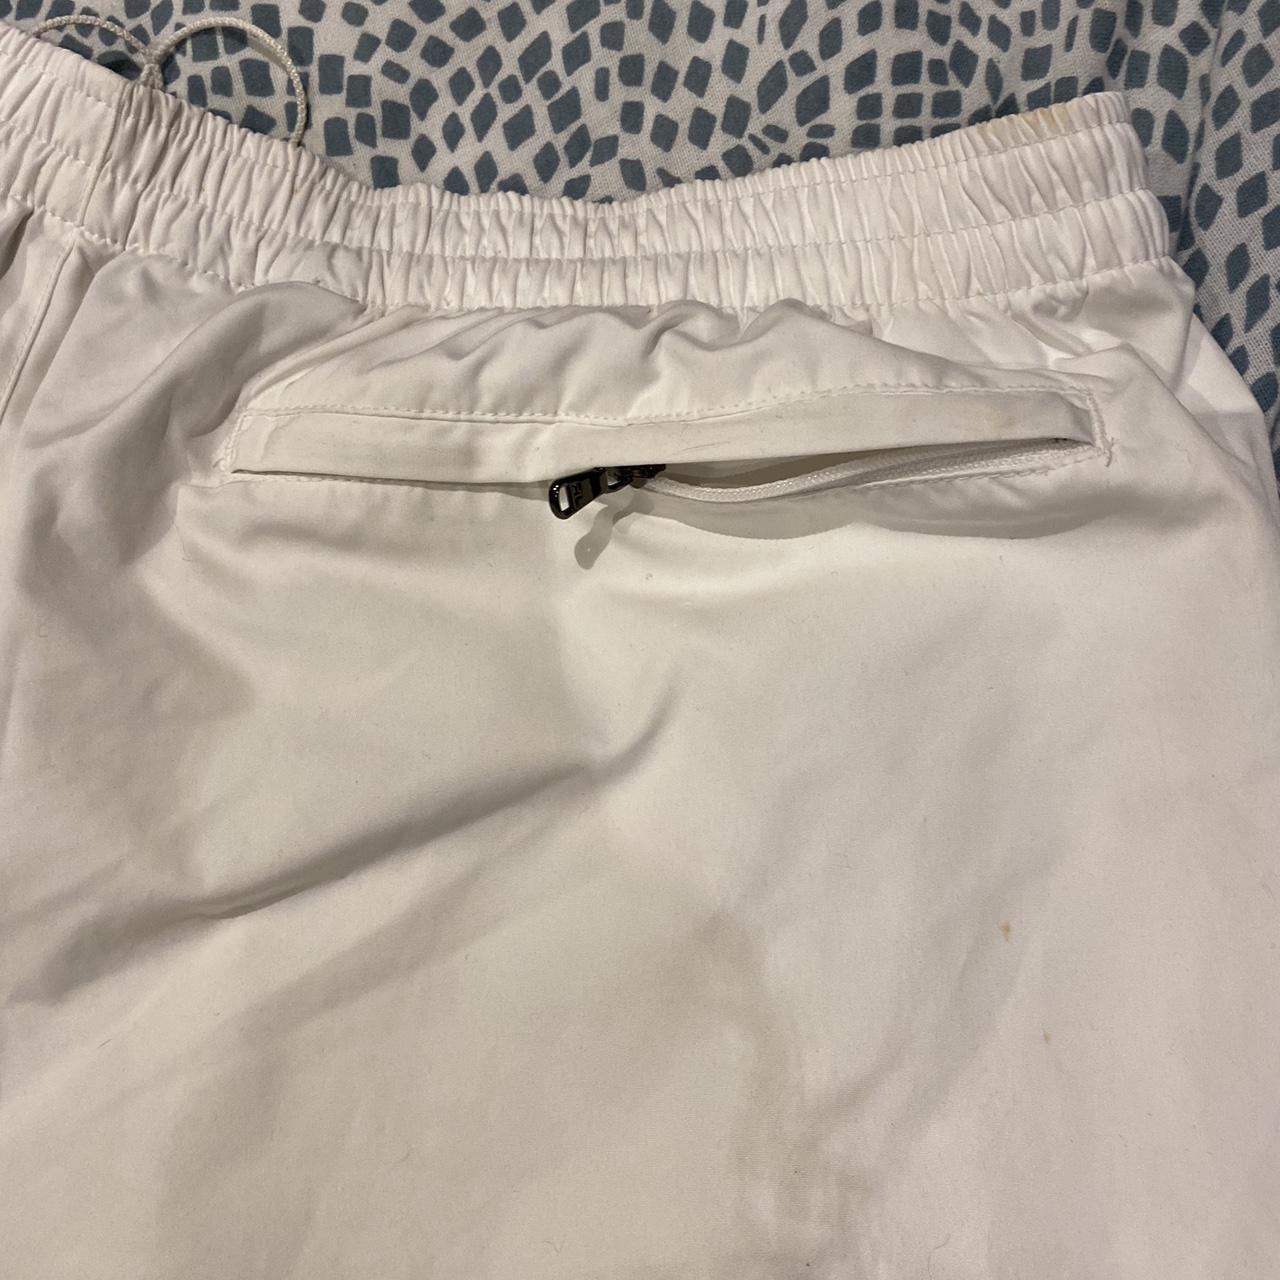 Polo Ralph Lauren Women's White and Blue Trousers | Depop